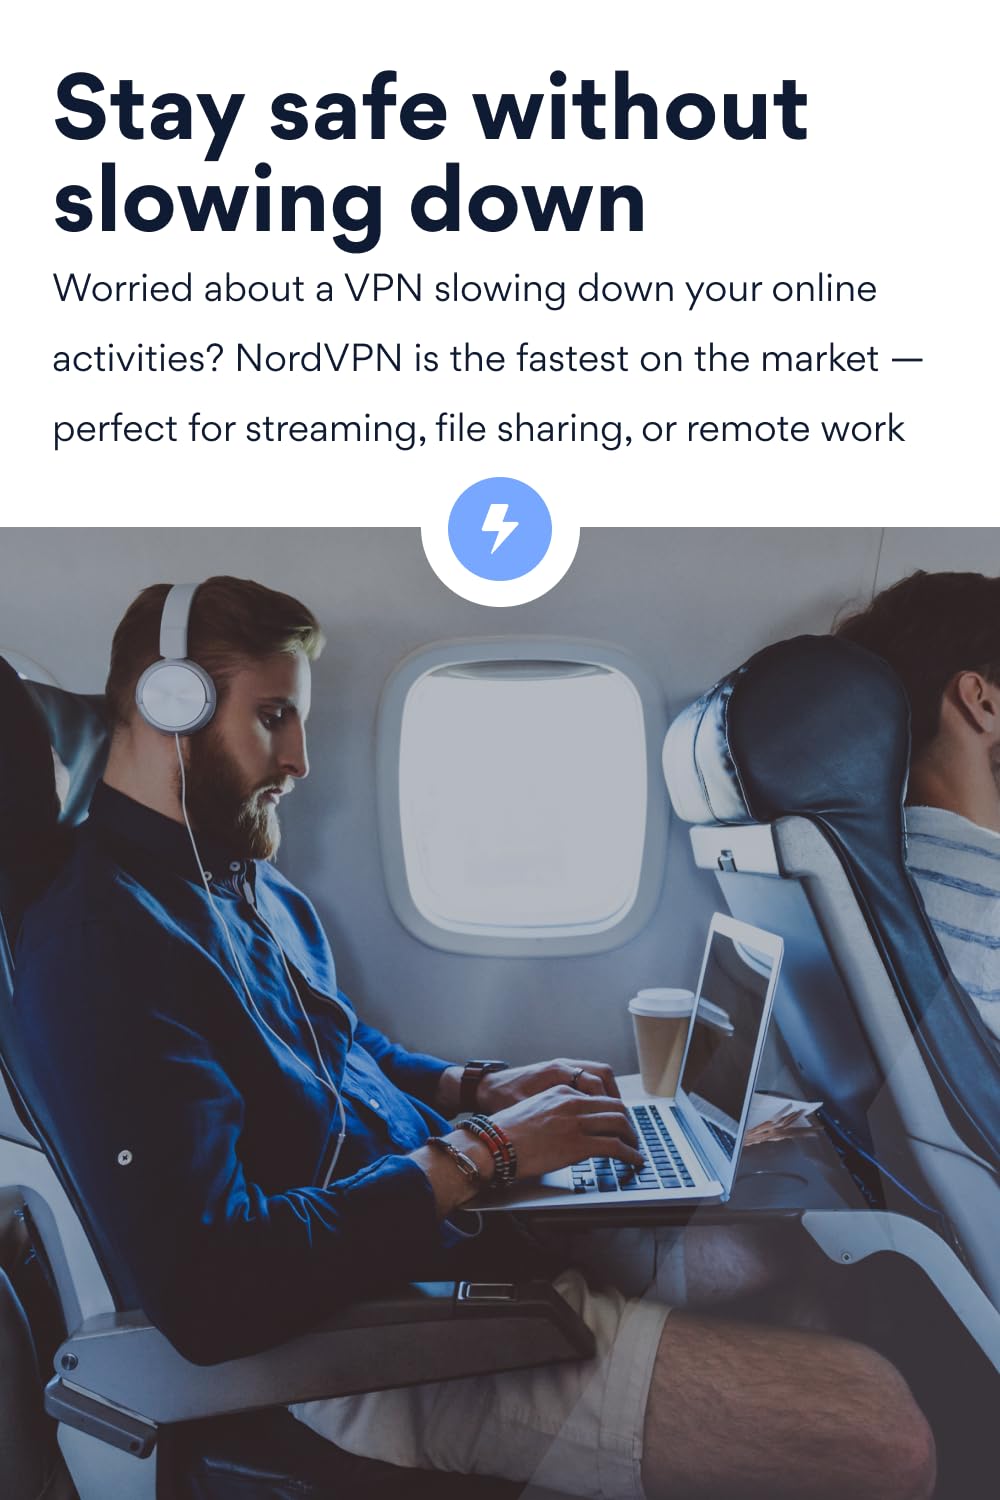 NordVPN Standard - 1-Year VPN & Cybersecurity Software Subscription For 6 Devices - Block Malware, Malicious Links & Ads, Protect Personal Information | PC/Mac/Mobile | Activation Code via Email [Online Code]